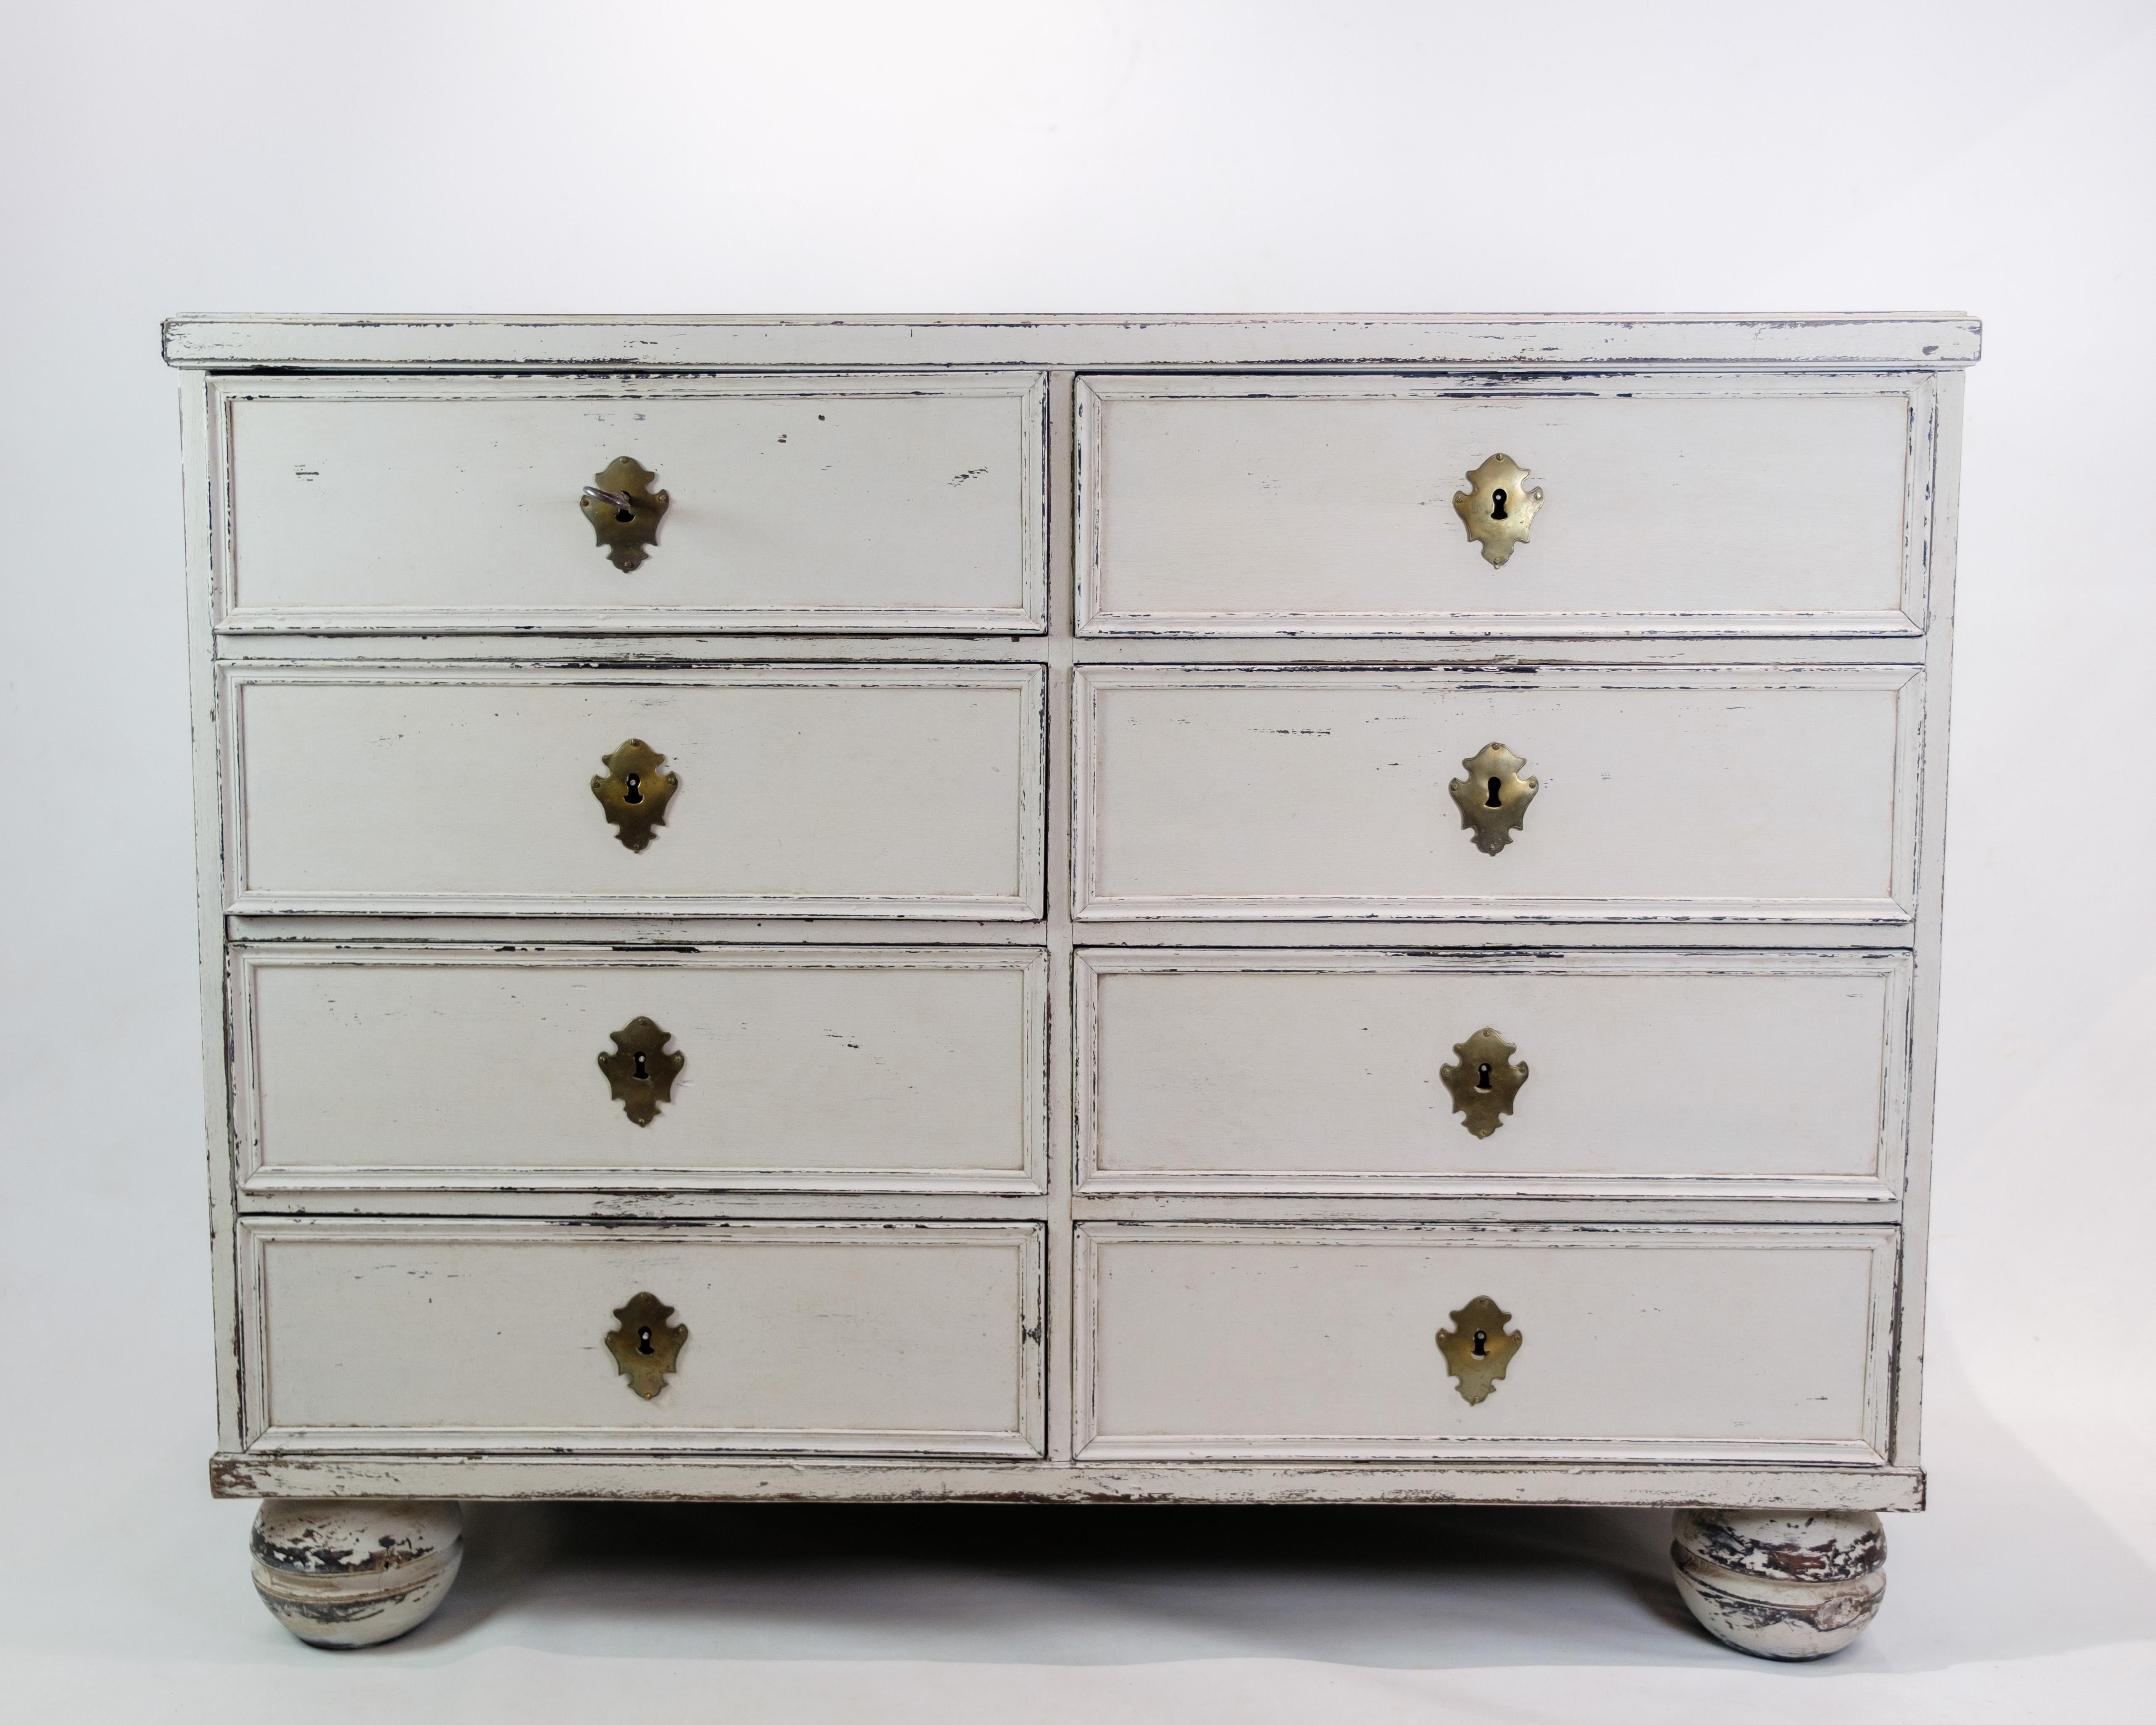 Late 18th Century Chest of drawers With 8 Drawers Inspired By The Gustavian style From 1780s For Sale